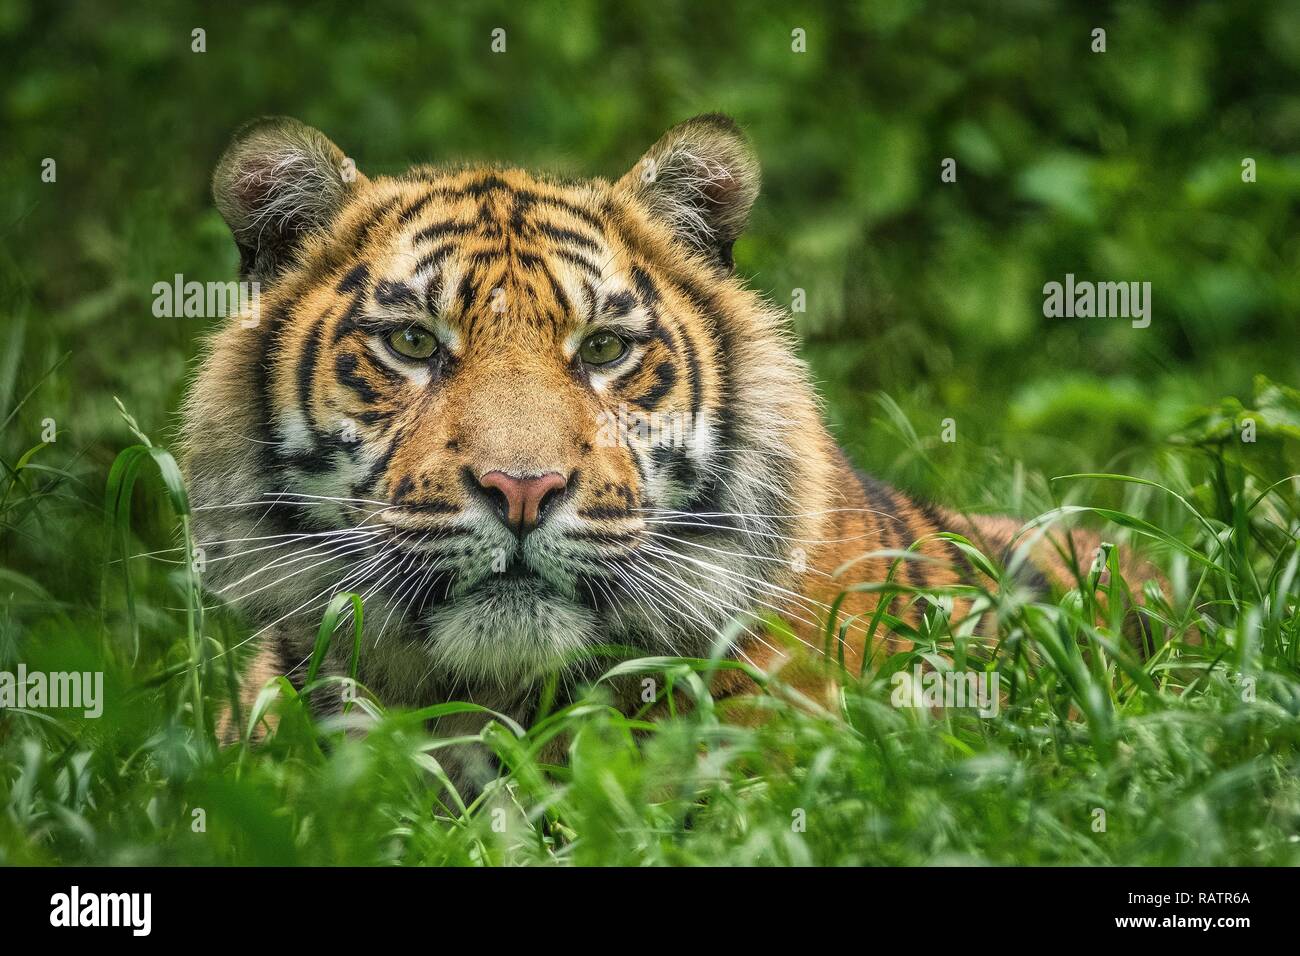 A close up photo of a Tiger cub in grass Stock Photo